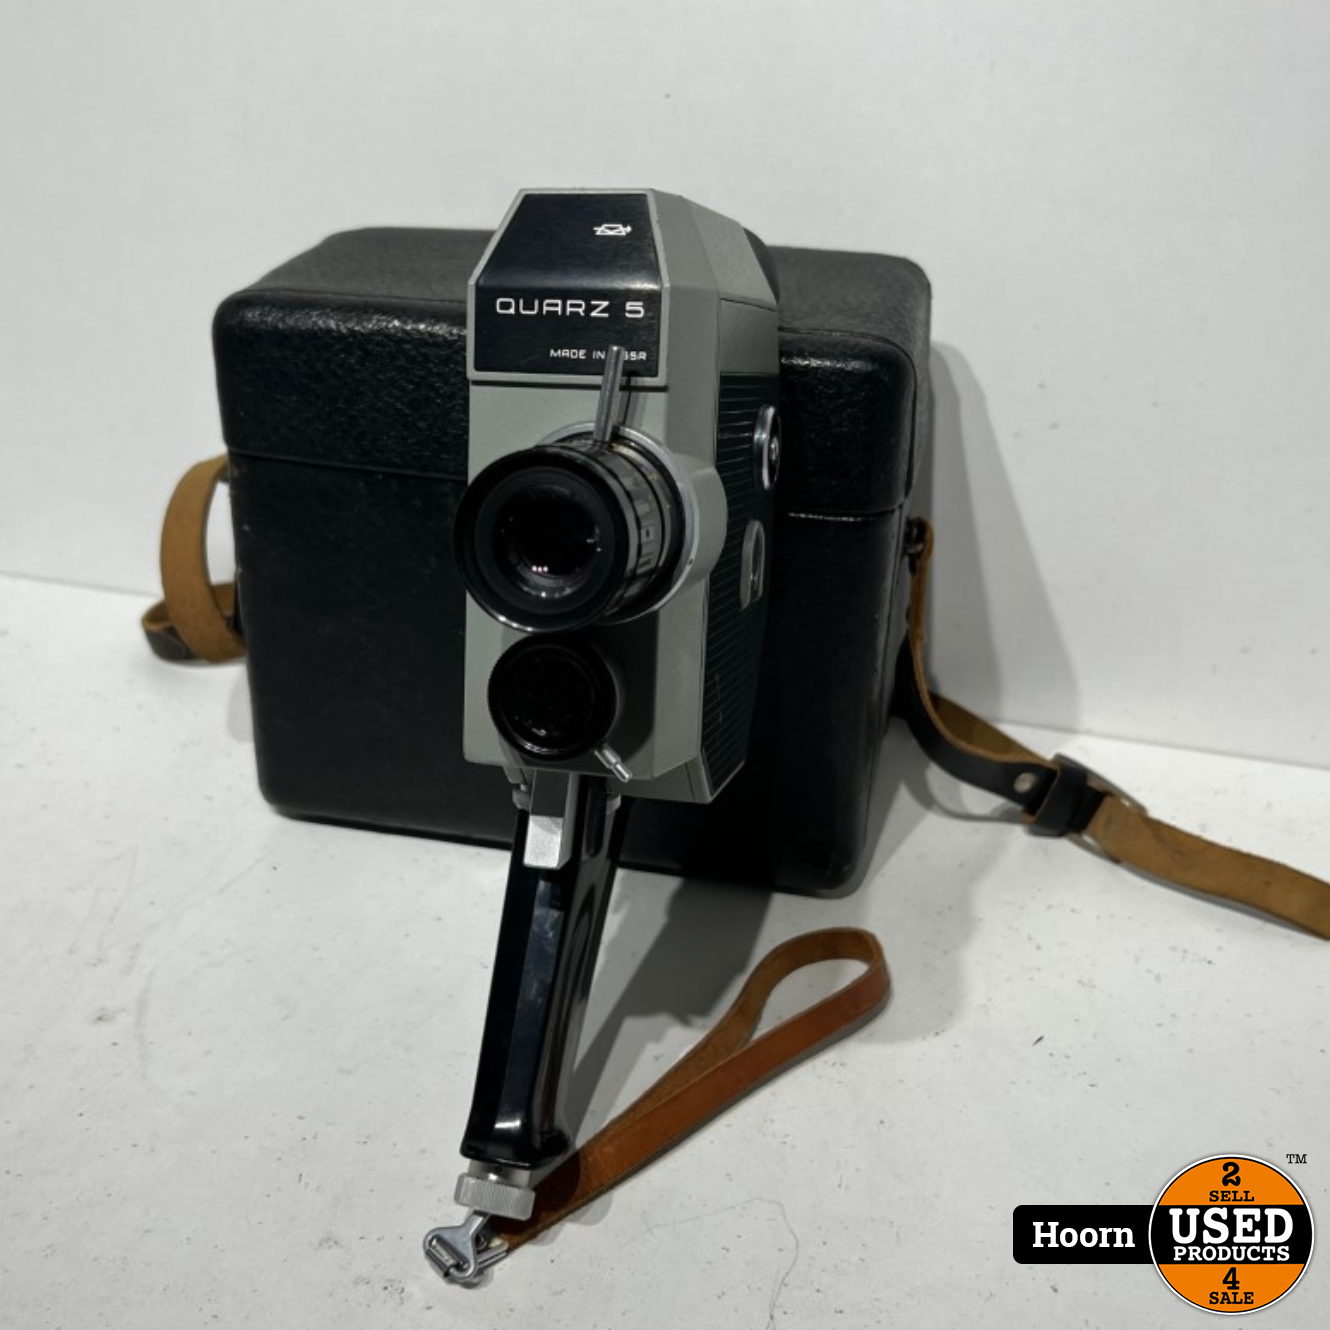 Quarz 5 Vintage Camera 8mm - Used Products